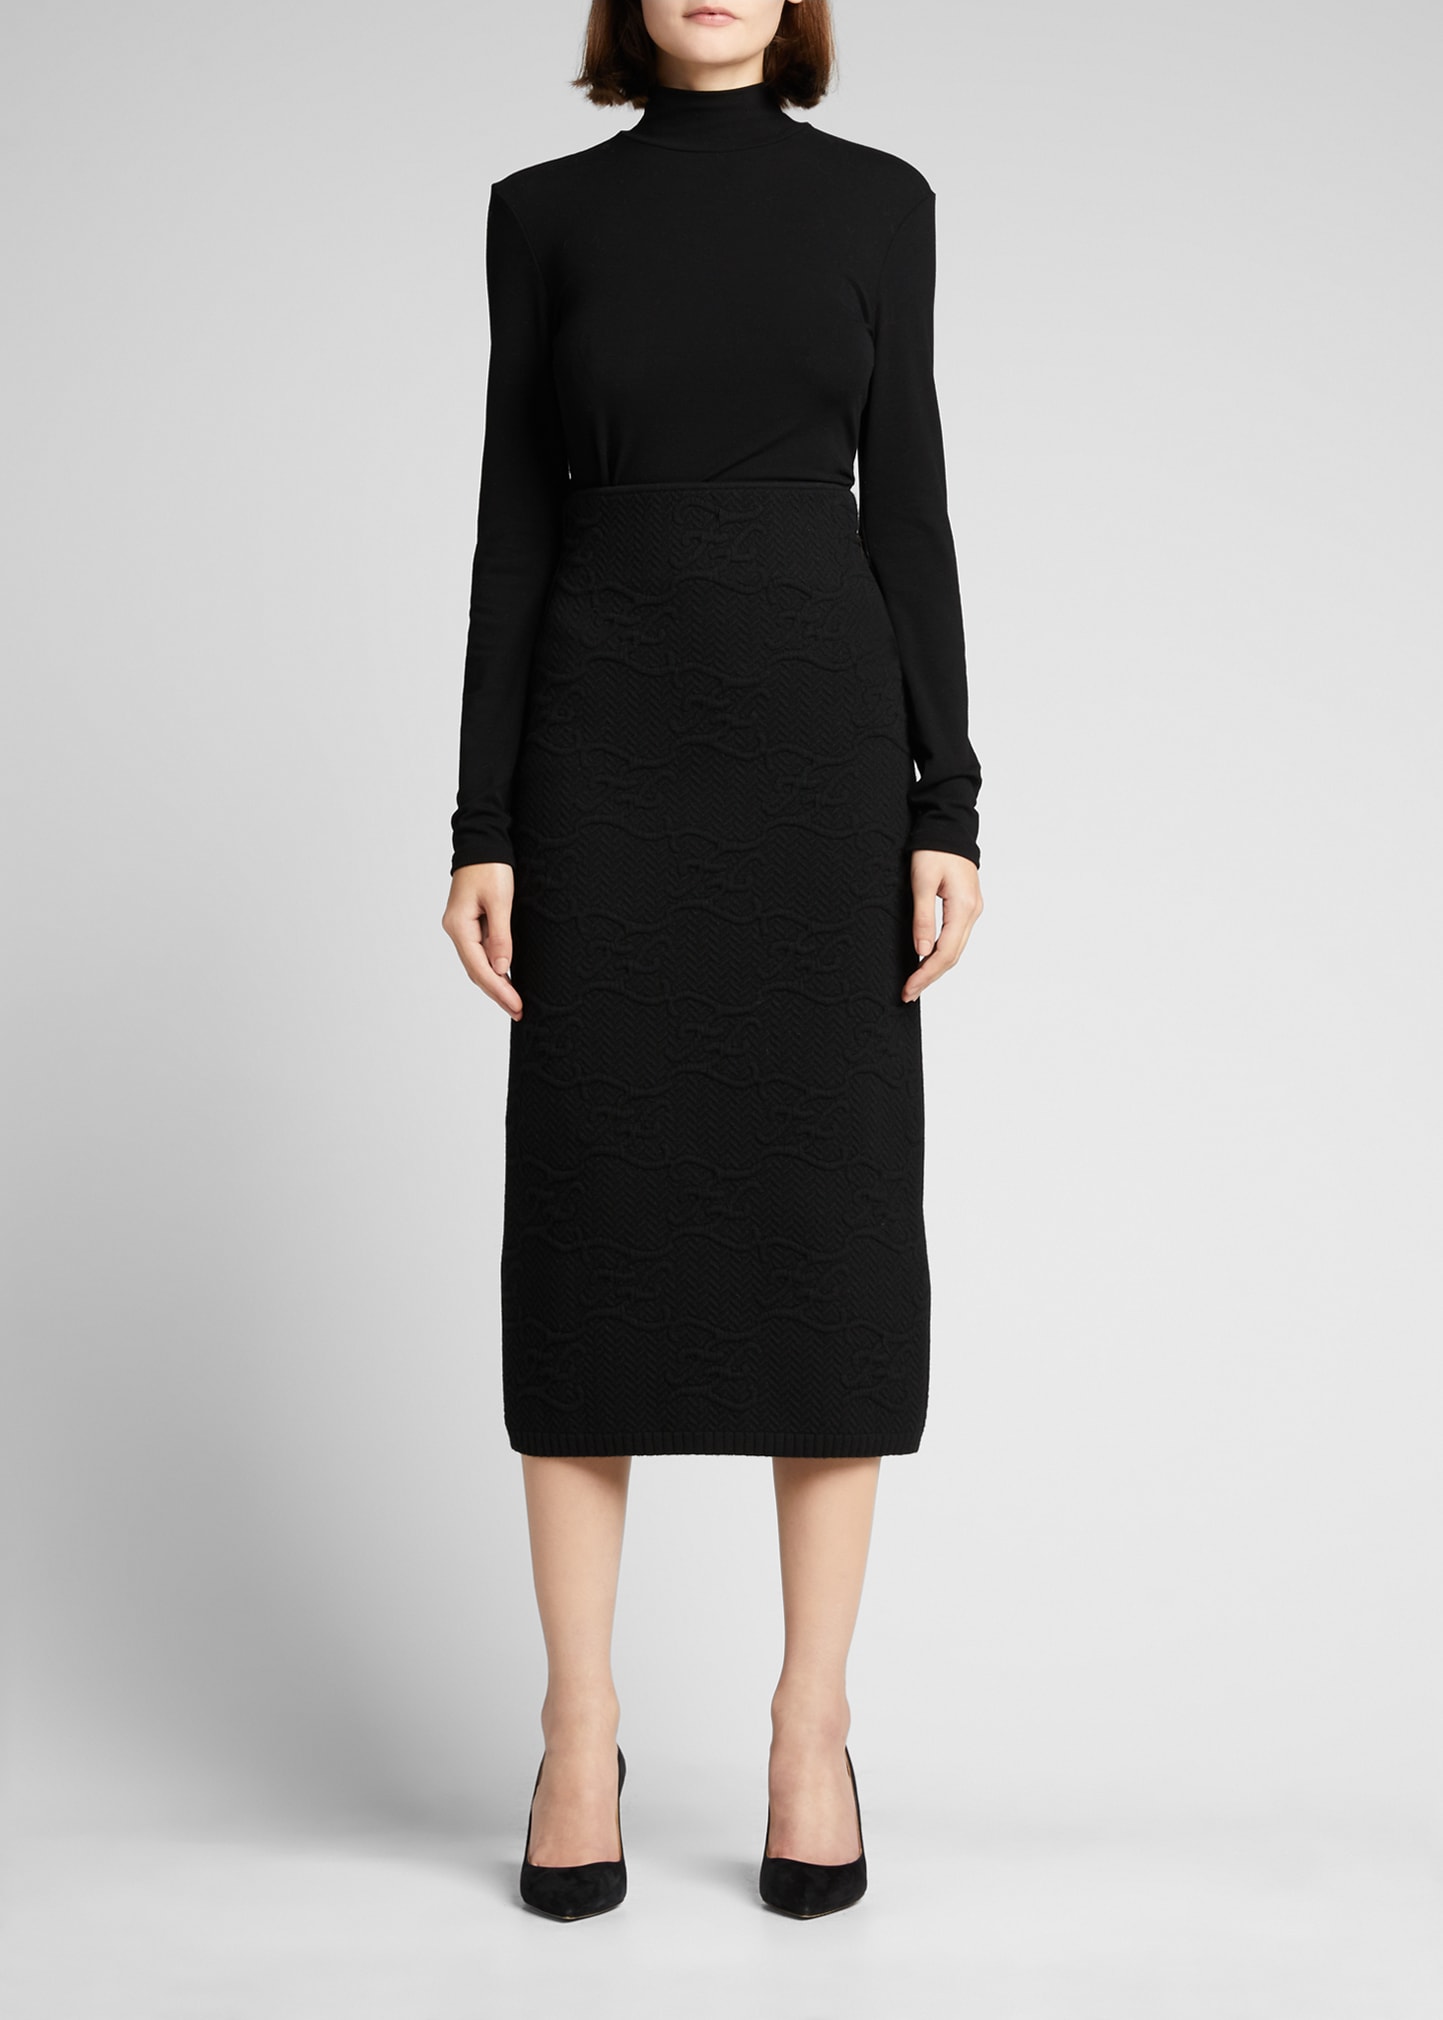 Fendi Karligraphy Quilted Pencil Midi Skirt